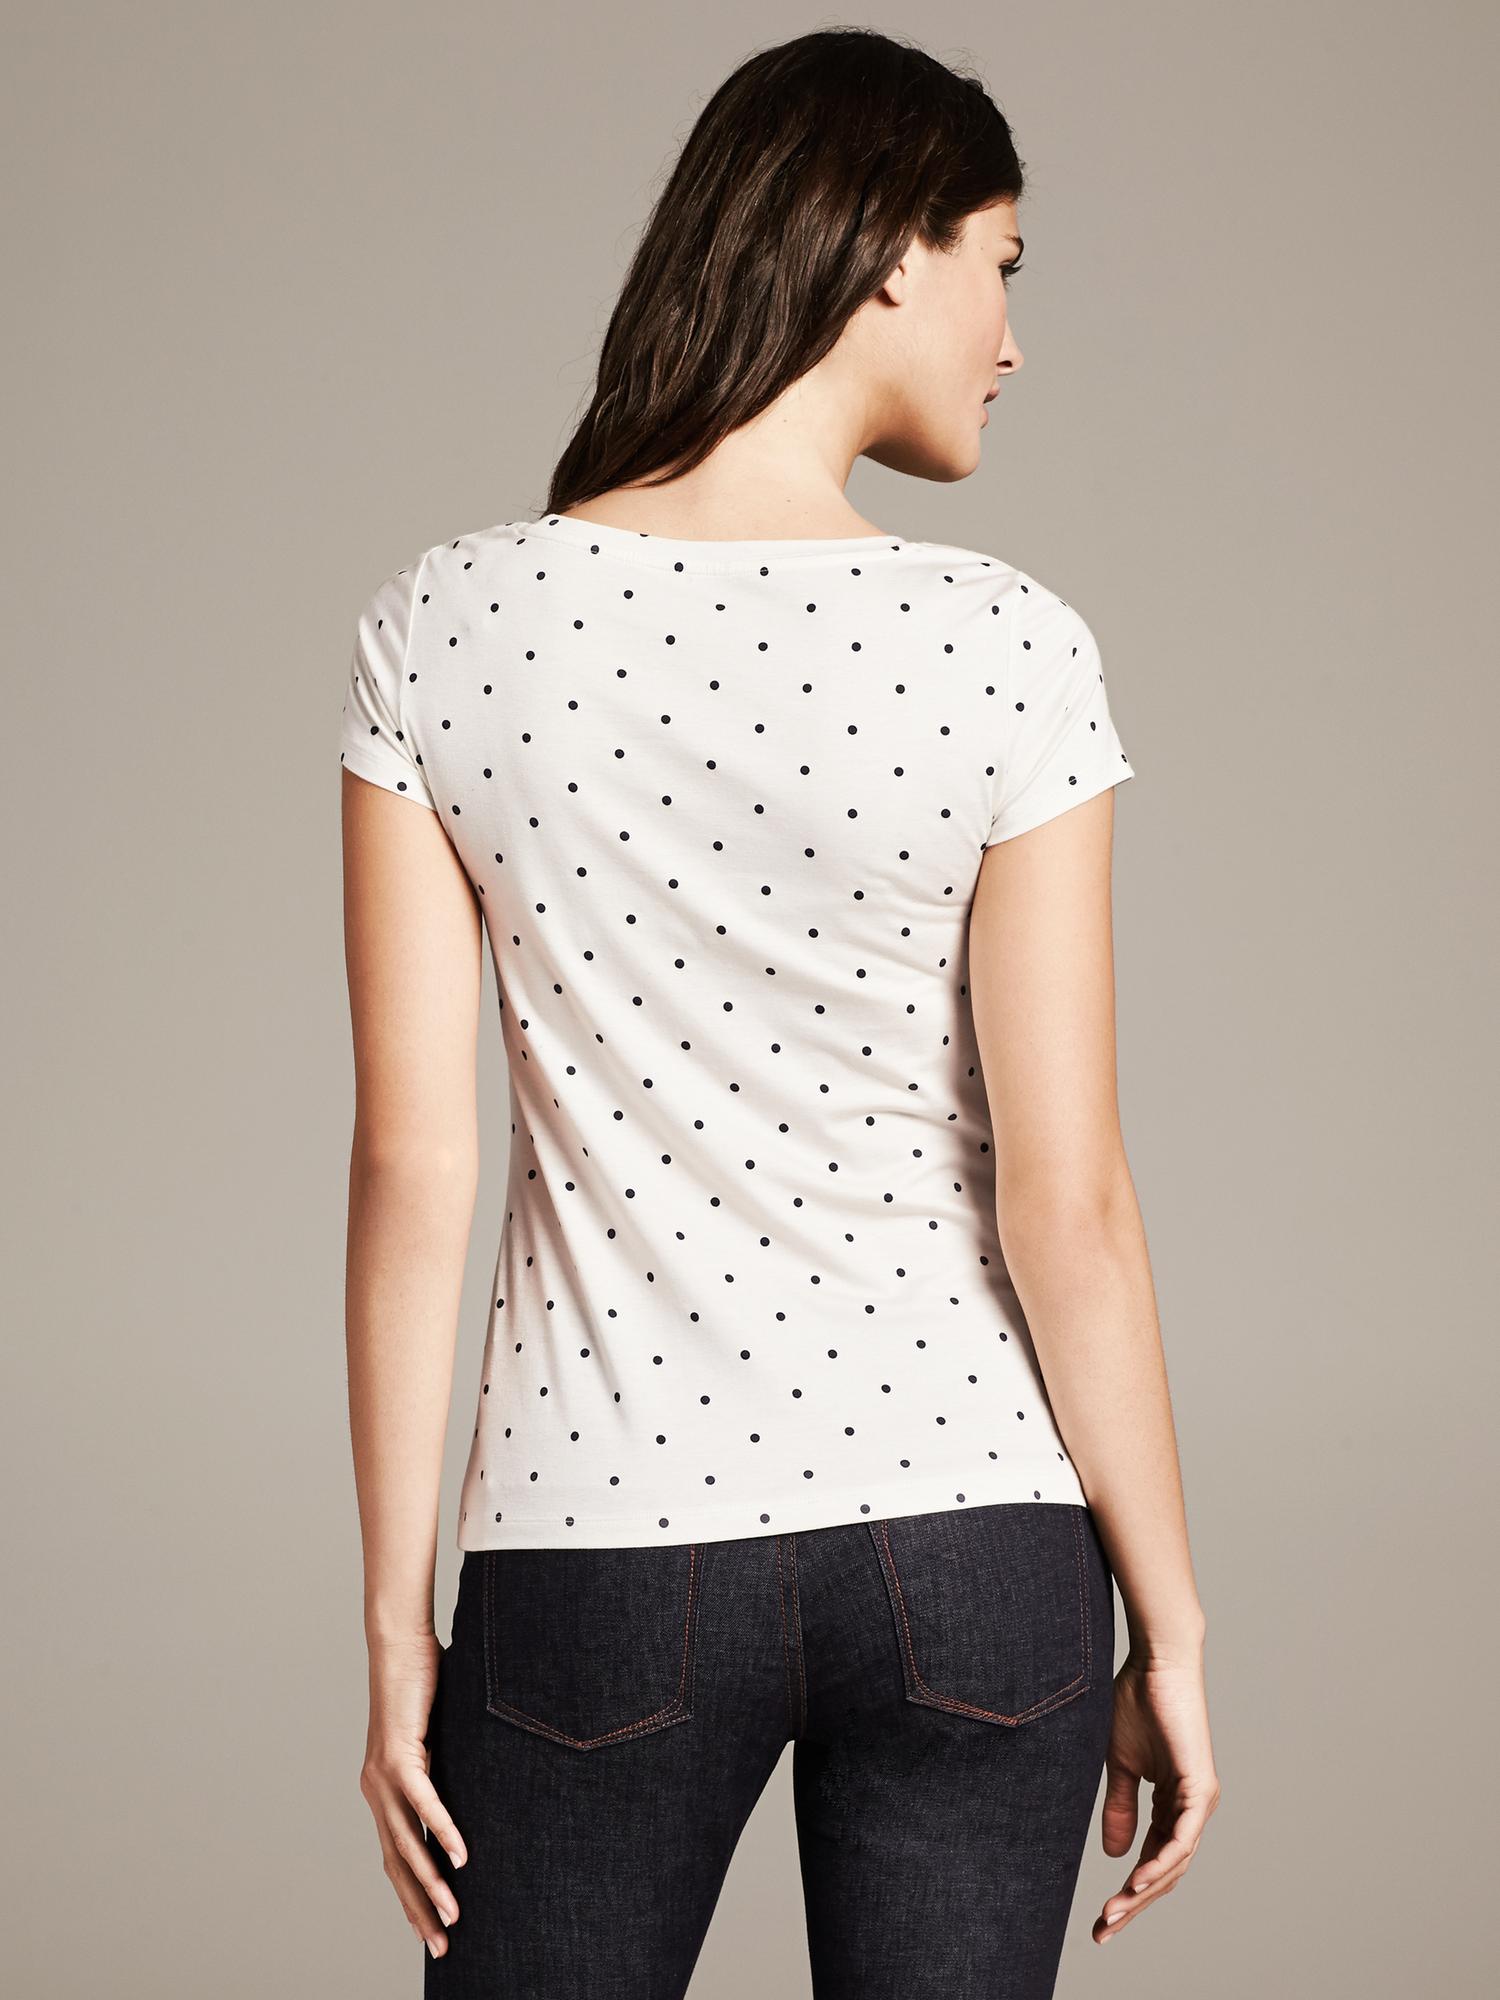 Luxe-Touch Dot Print White Tee